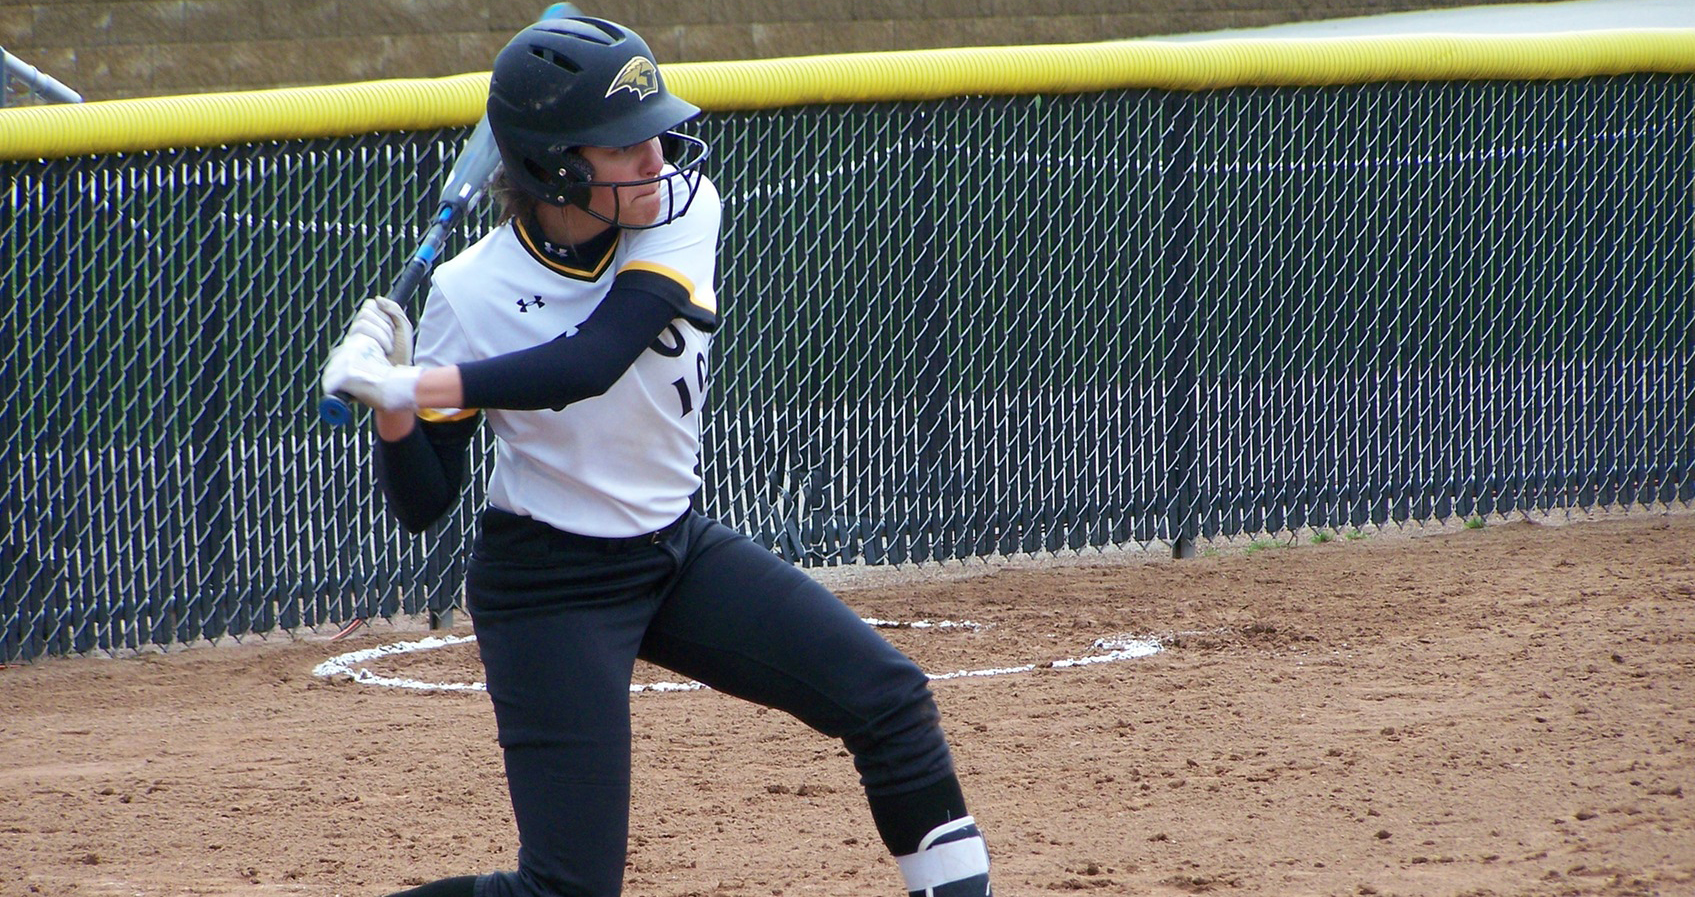 Natalie Dudek was 5-for-12 with a double and two home runs in the Titans' four contests at the WIAC Championship.